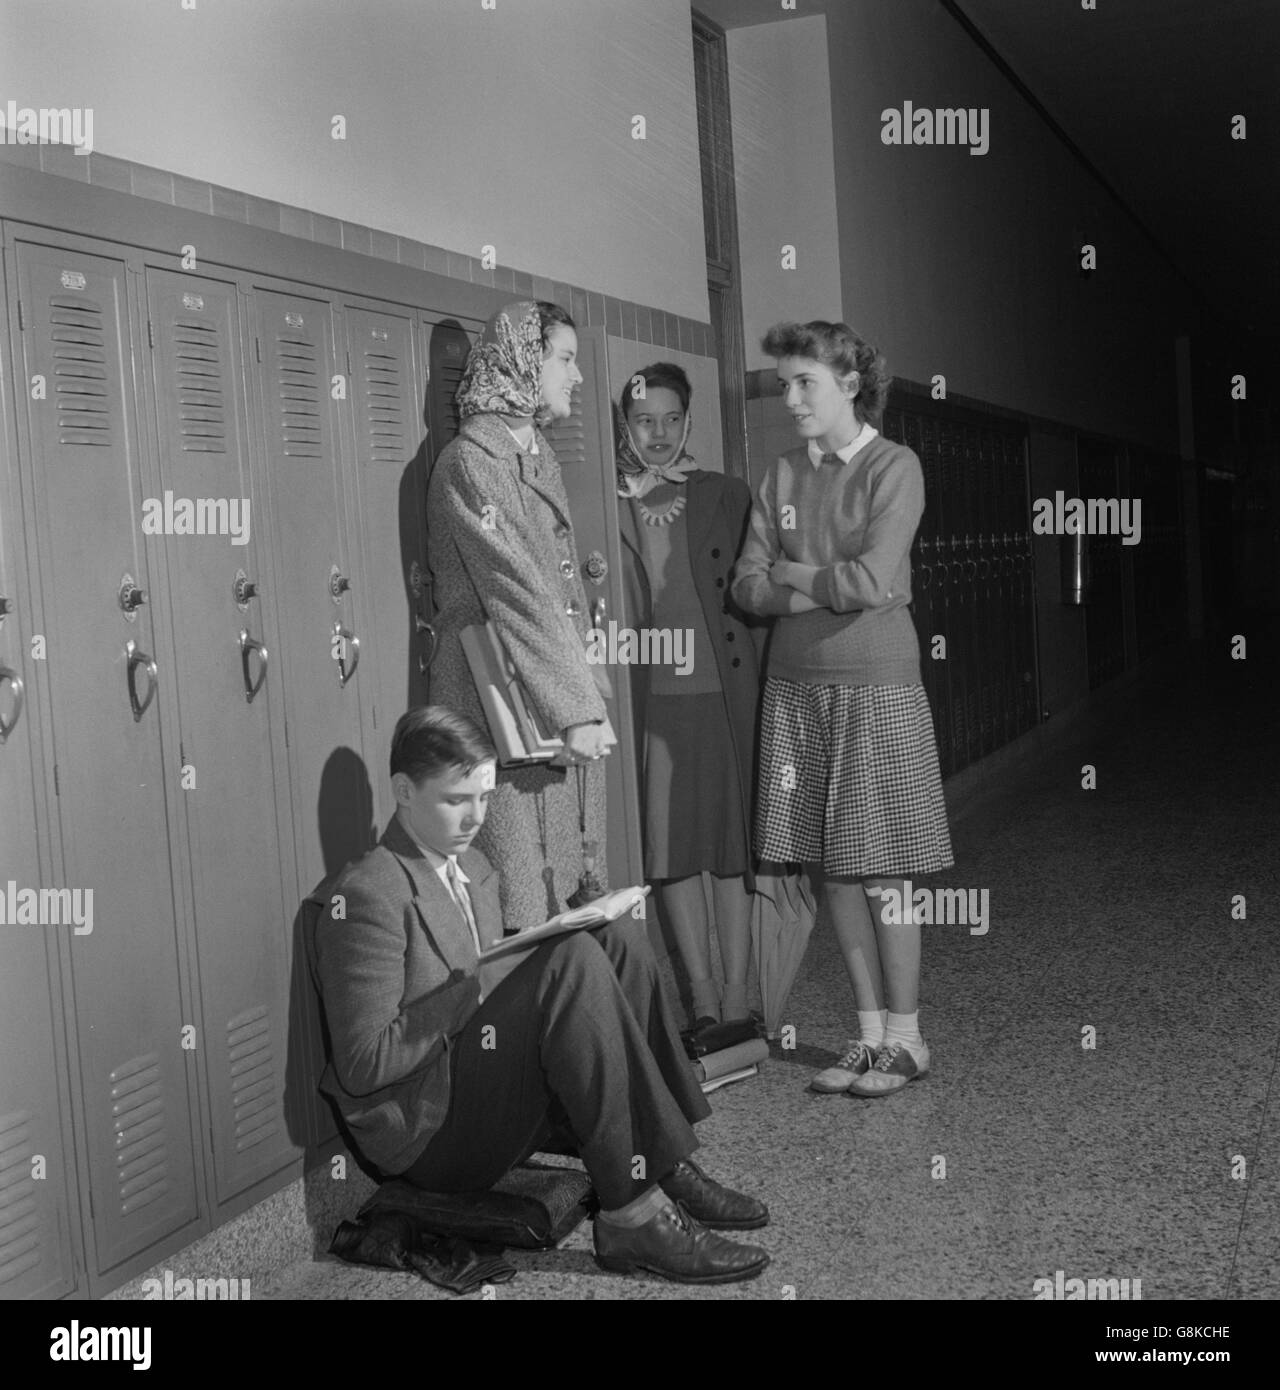 Group of High School Students Talking at Lockers, Washington DC, USA, Esther Bubley for Office of War Information, October 1943 Stock Photo